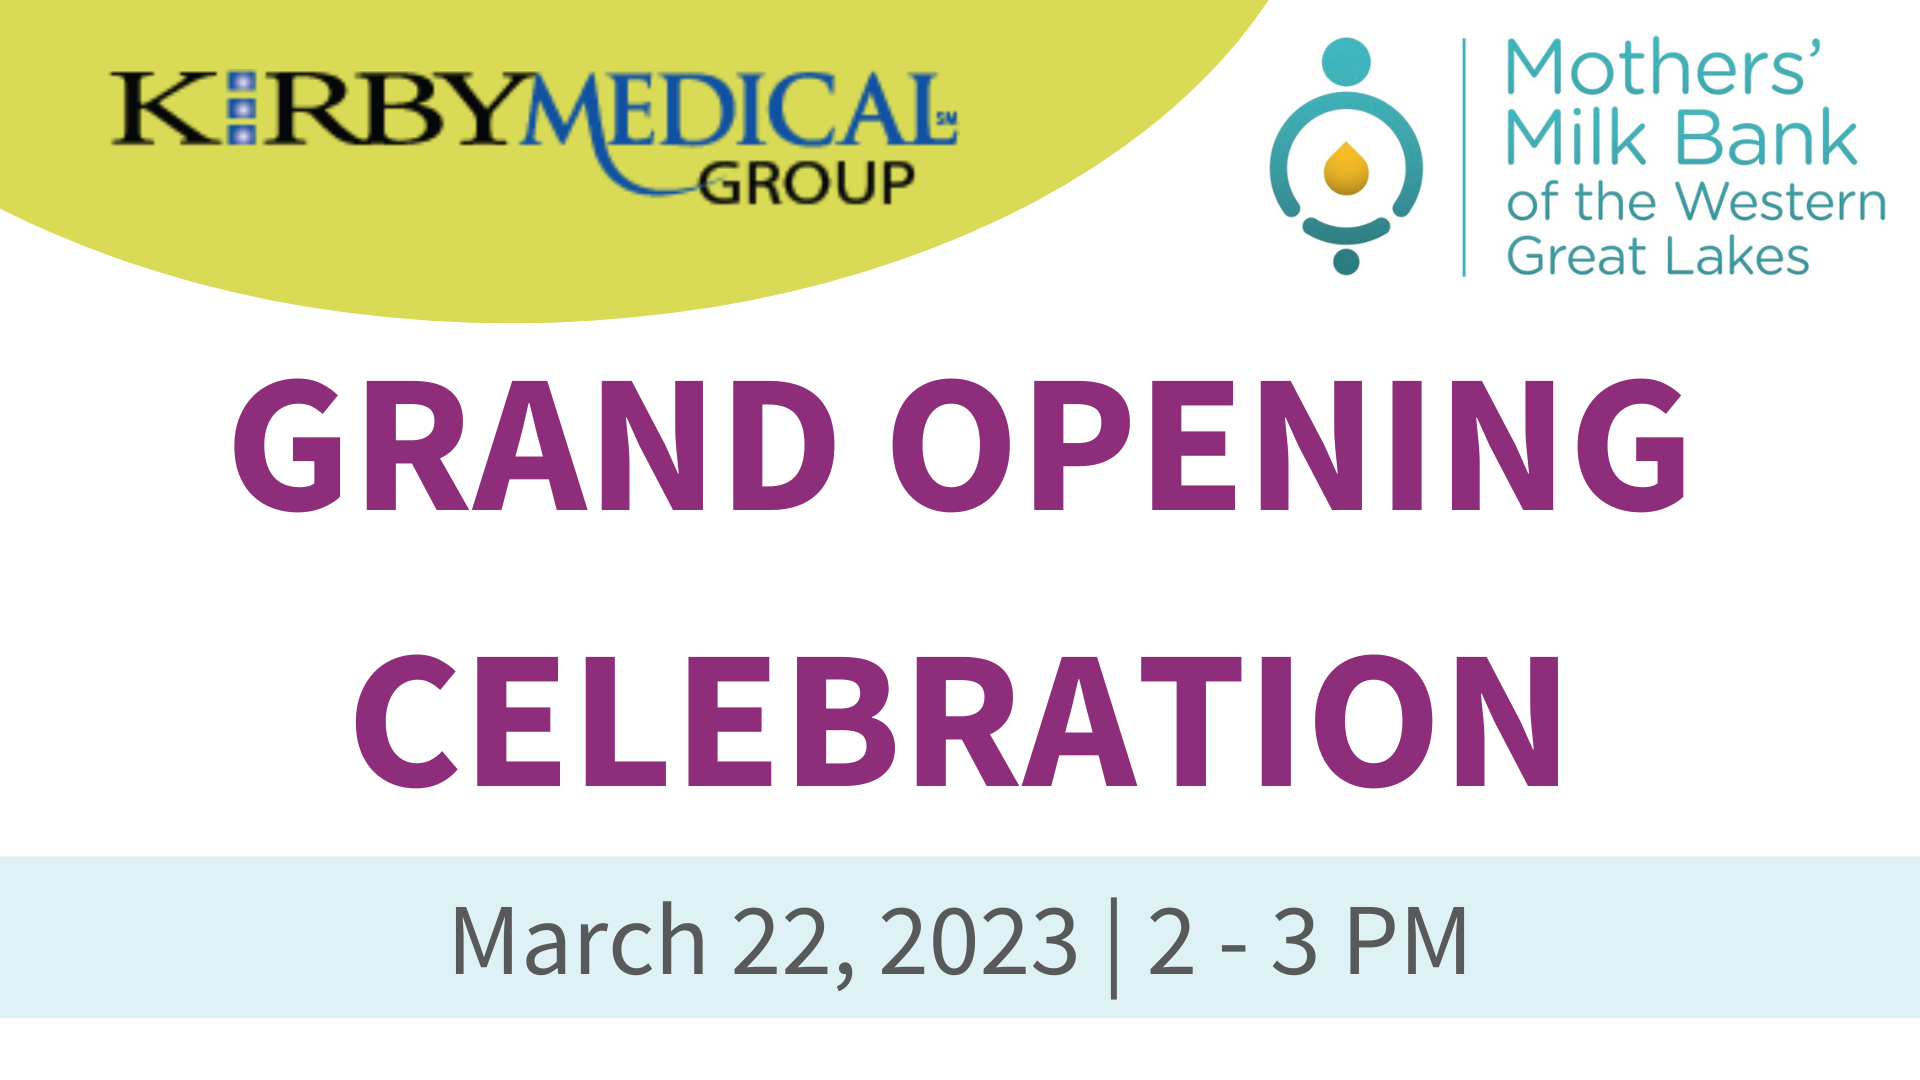 Kirby Medical Group Mothers' Milk Bank of the Western Great Lakes Grand Opening Celebration March 22, 2023 2-3pm